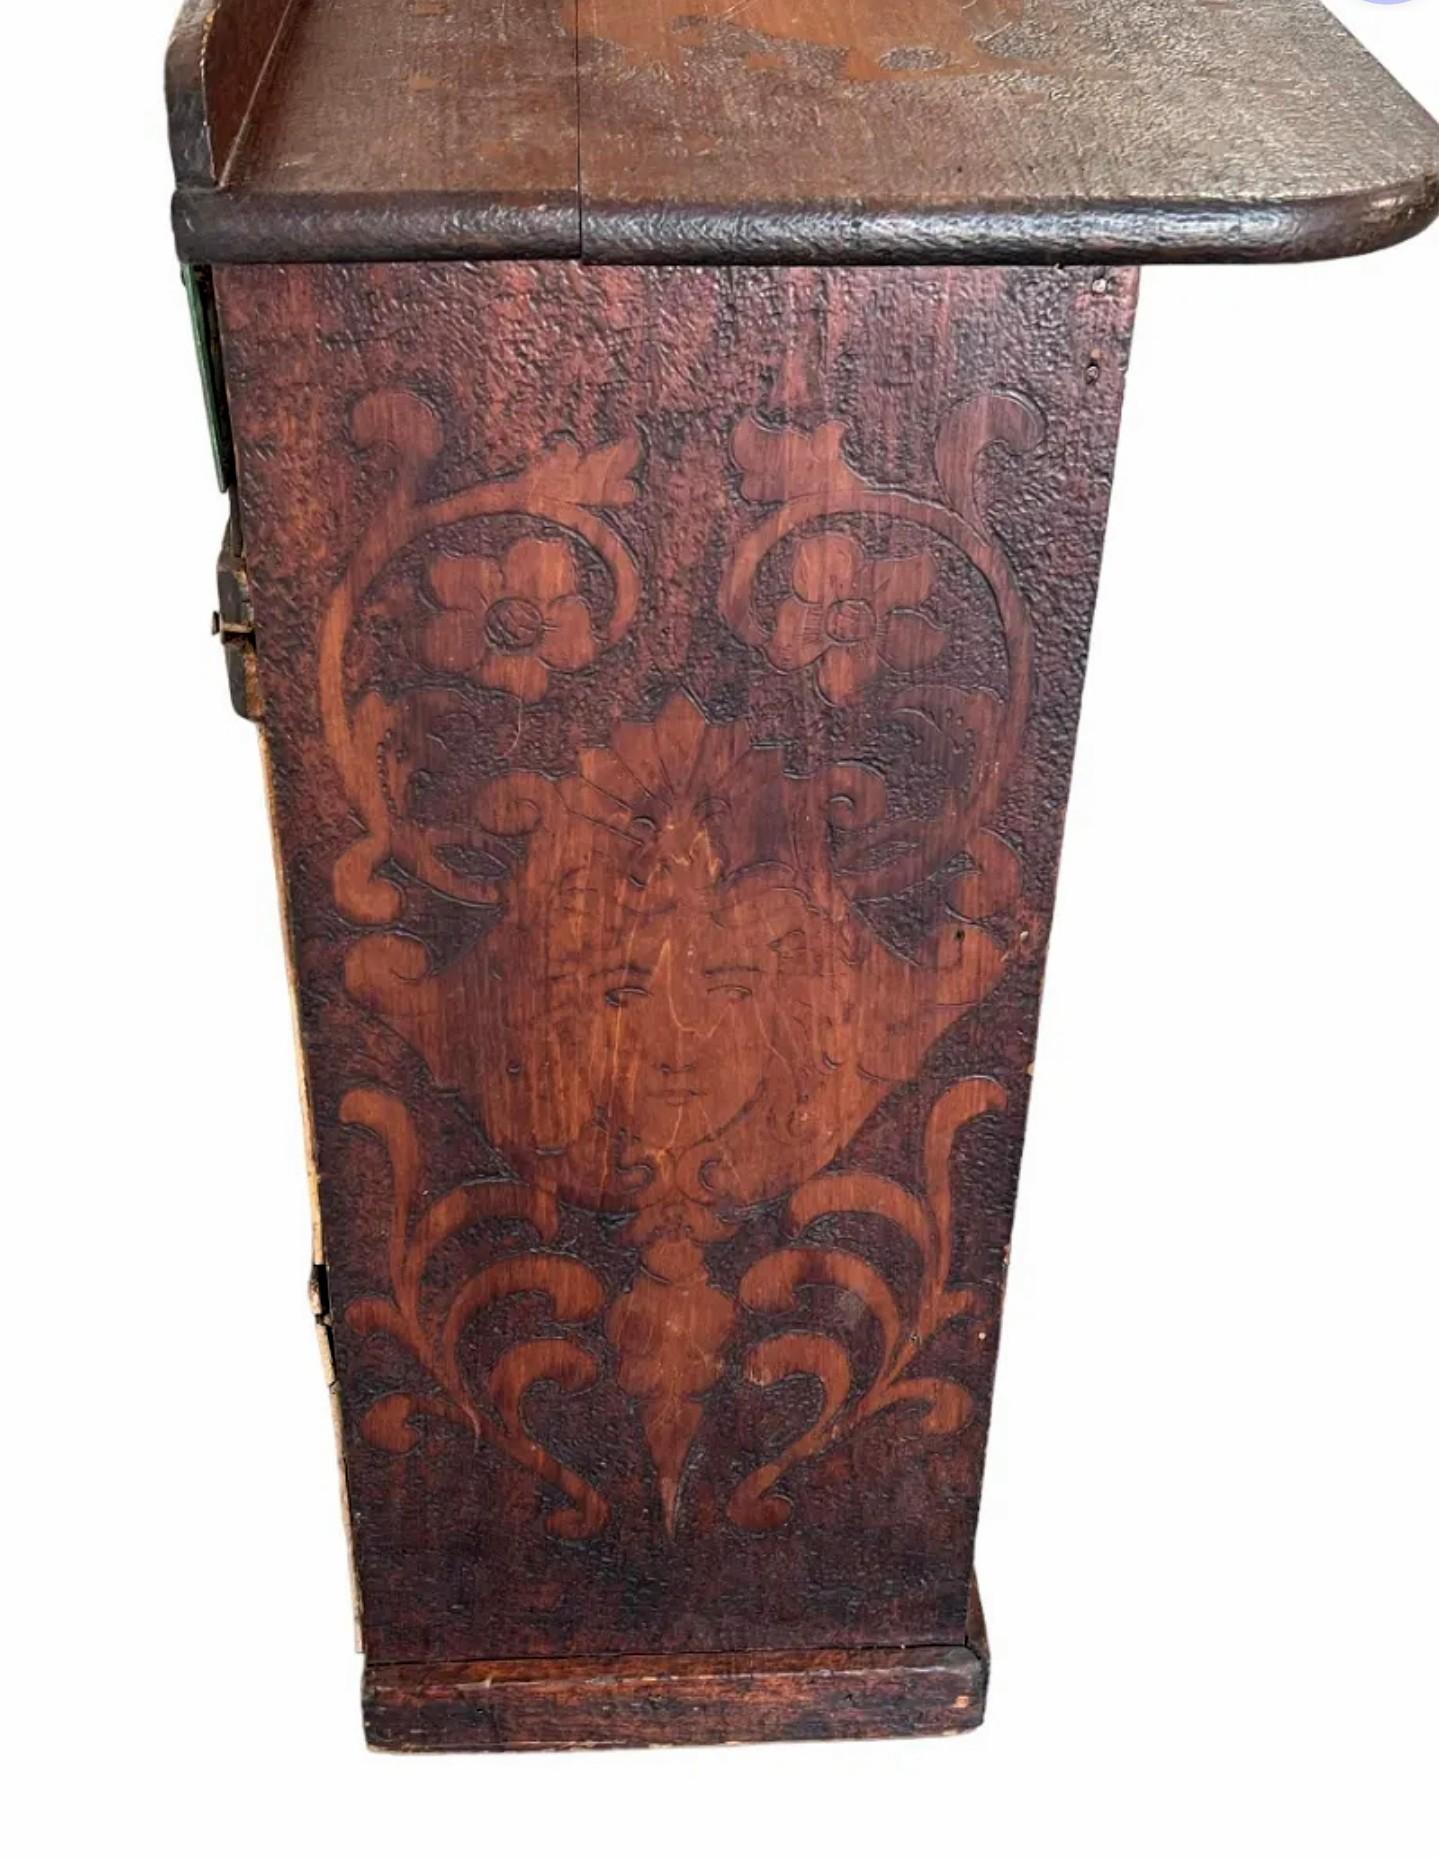 Folk Art Rare Early American Country Pyrography Desk For Sale